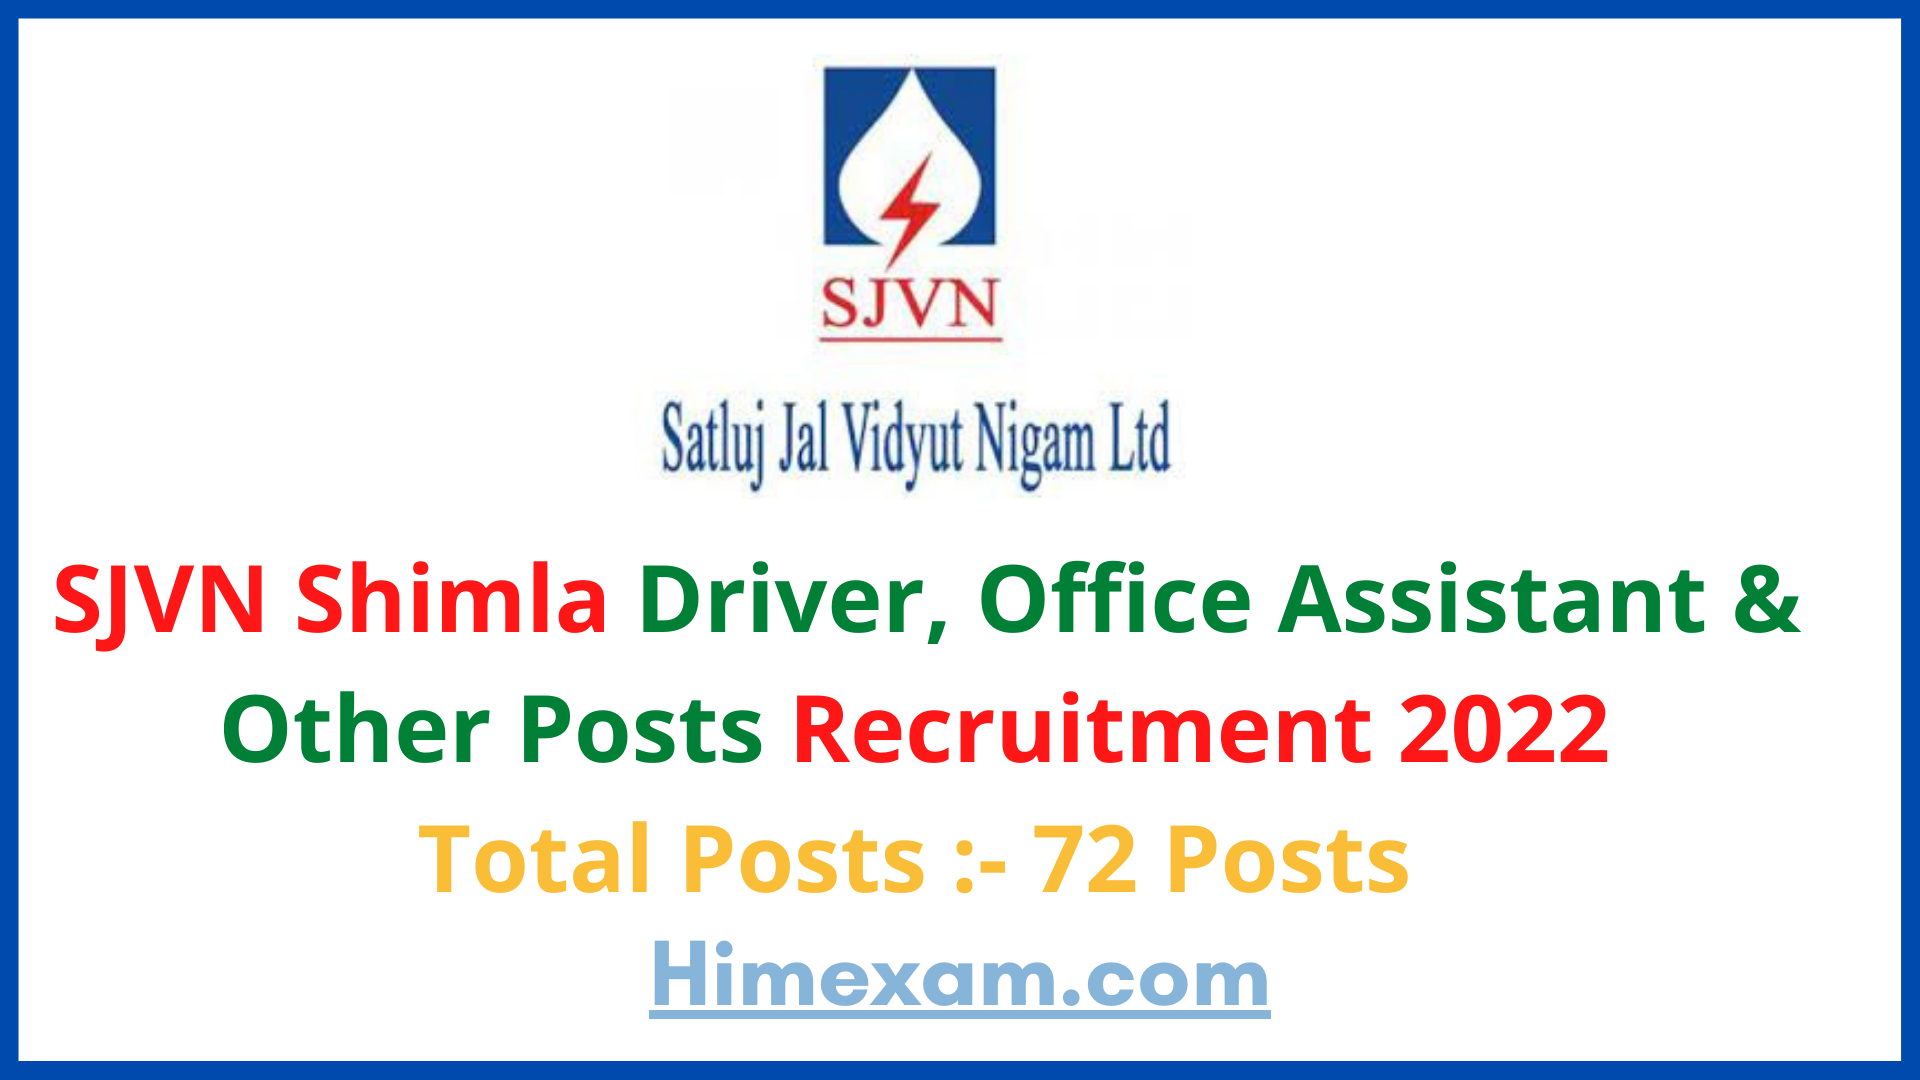 SJVN Shimla Driver,Office Assistant & Other Posts Recruitment 2022